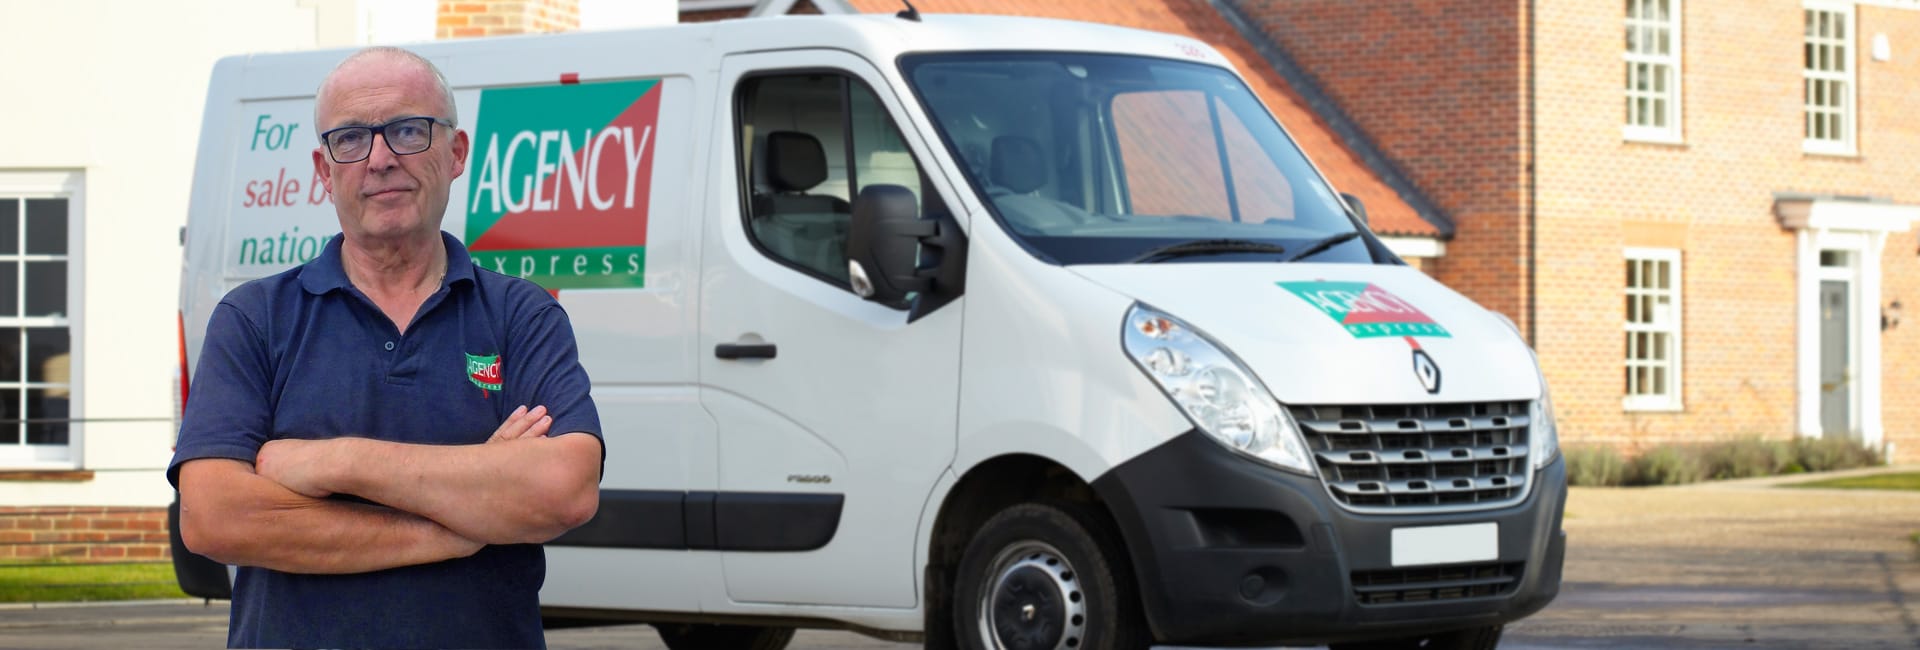 Agency Express case study. Franchisee Peter Waters with van.